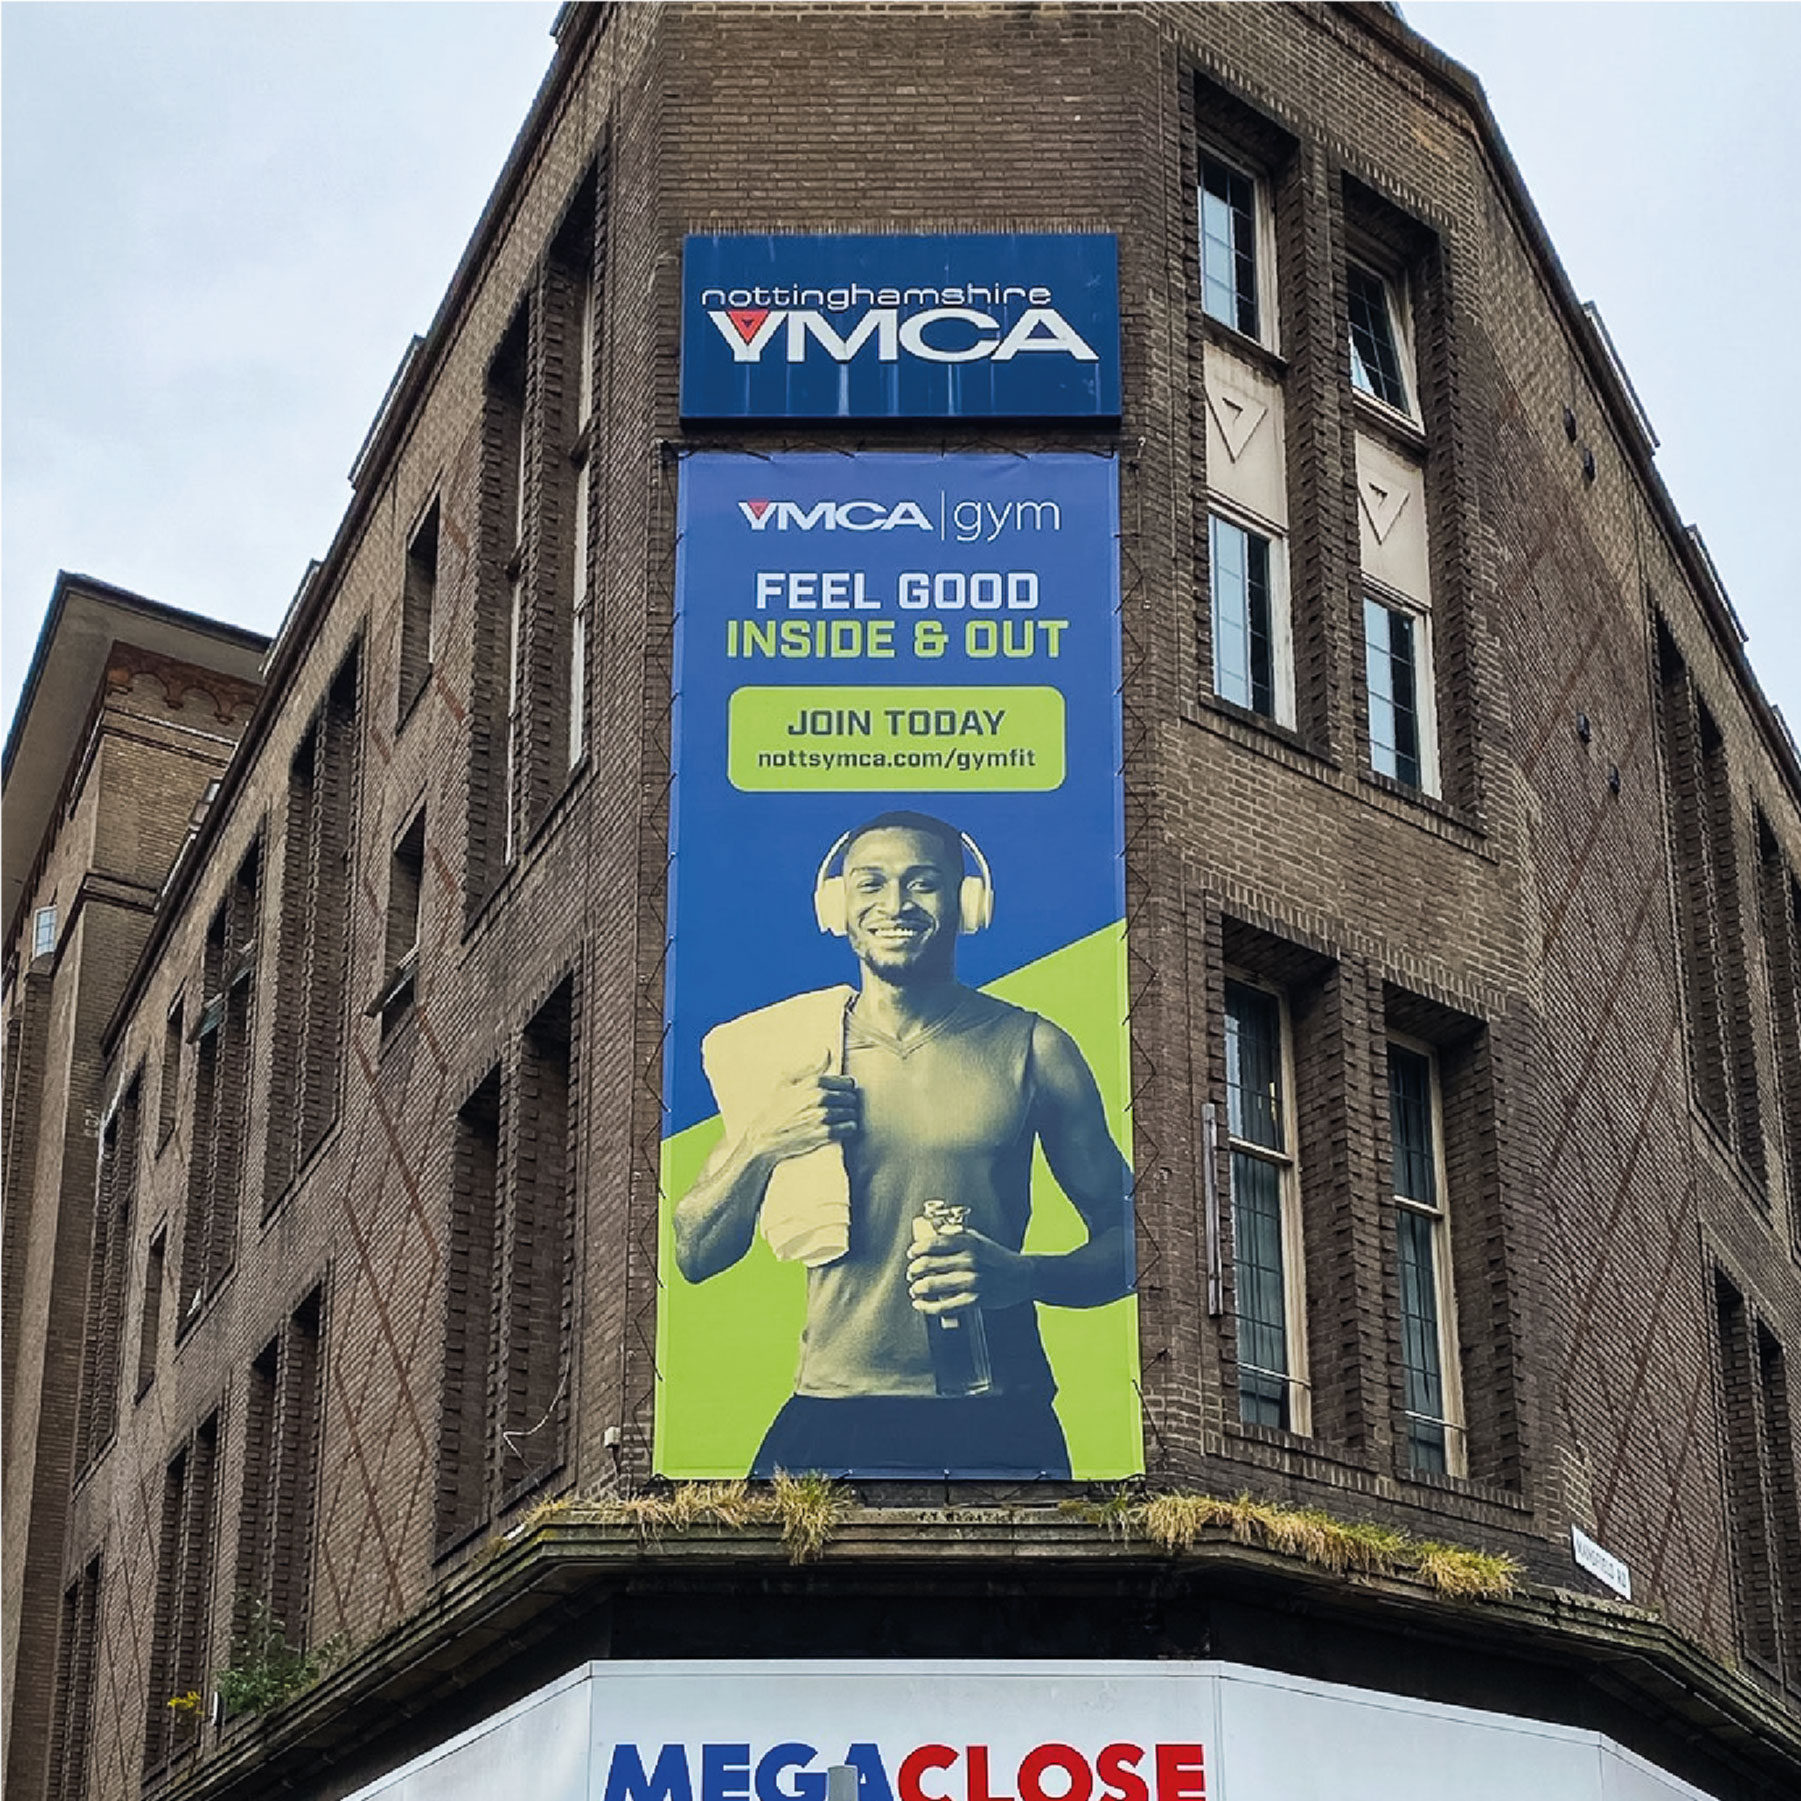 Large portrait banner advertising YMCA gym with a green and blue toned image of a gym-goer.